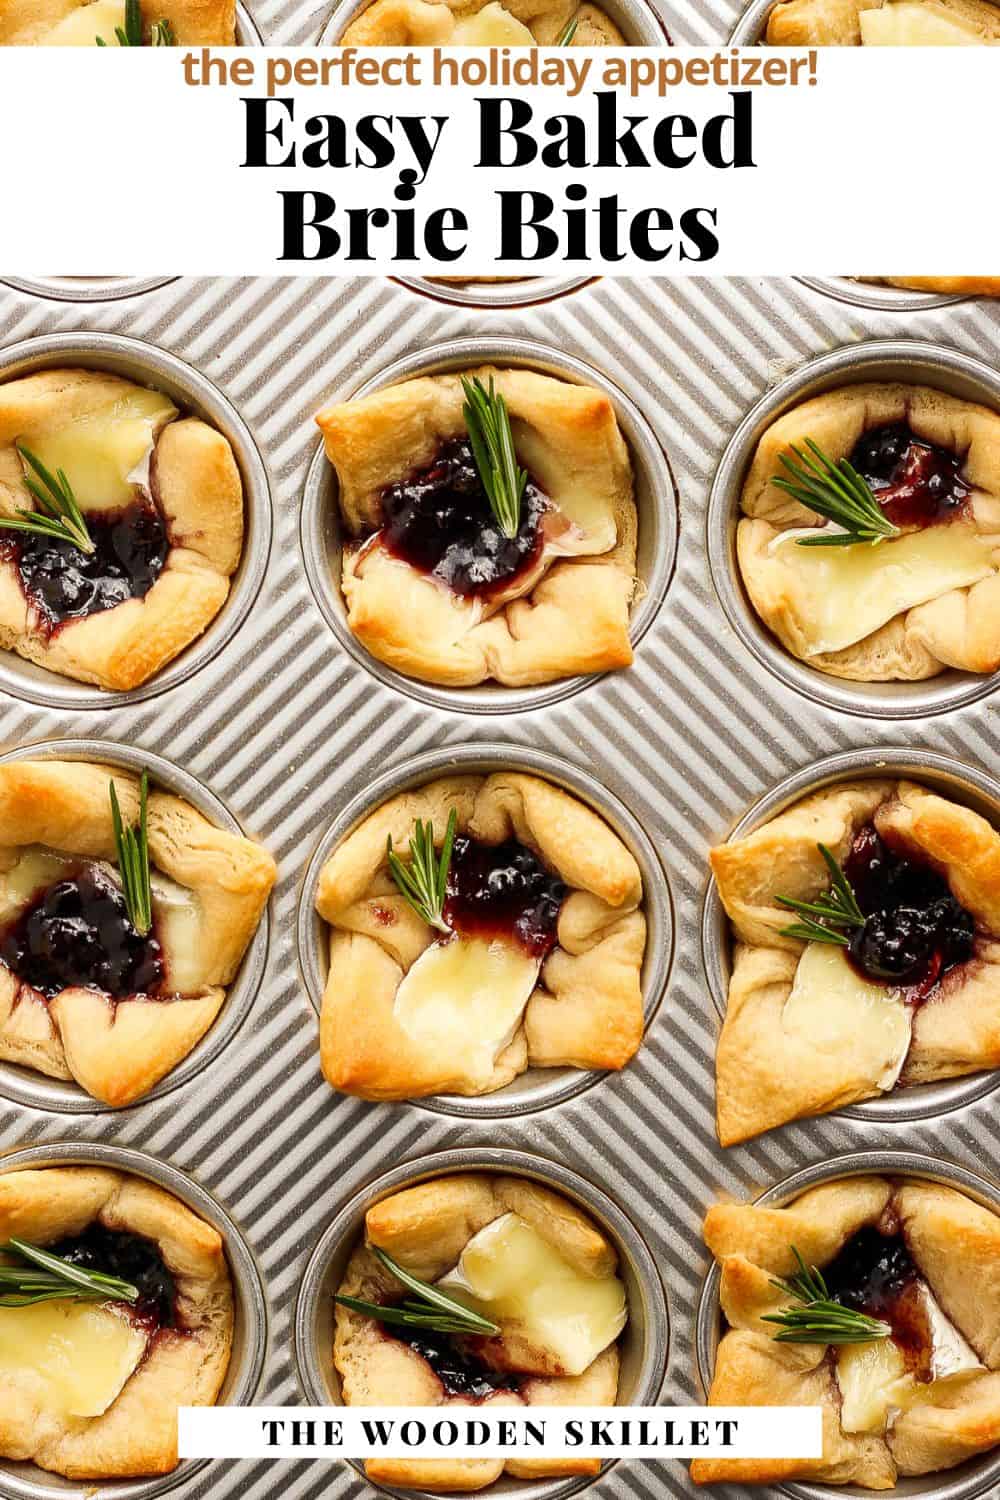 Pinterest image showing baked brie bites with the title "Easy baked brie bites. The perfect holiday appetizer."